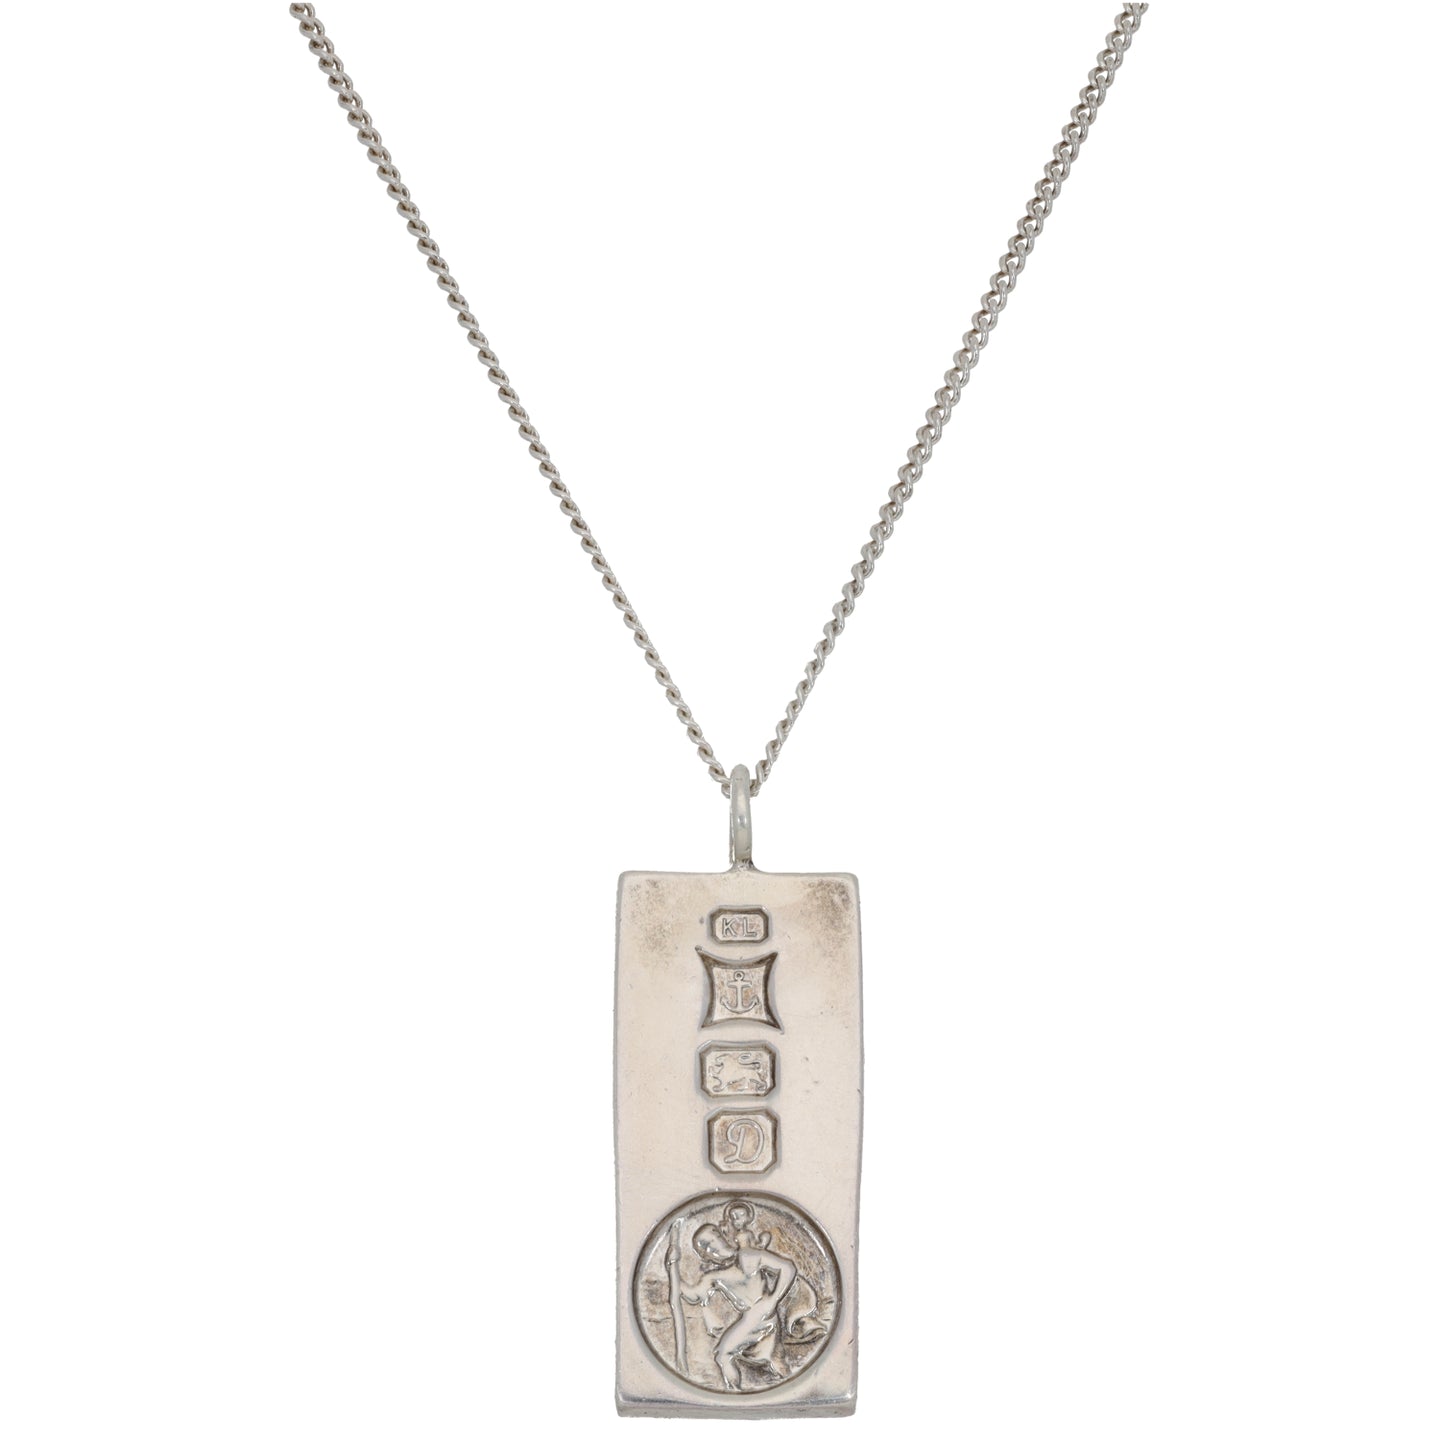 Silver Ingot Necklace by Serge DeNimes Online | THE ICONIC | Australia